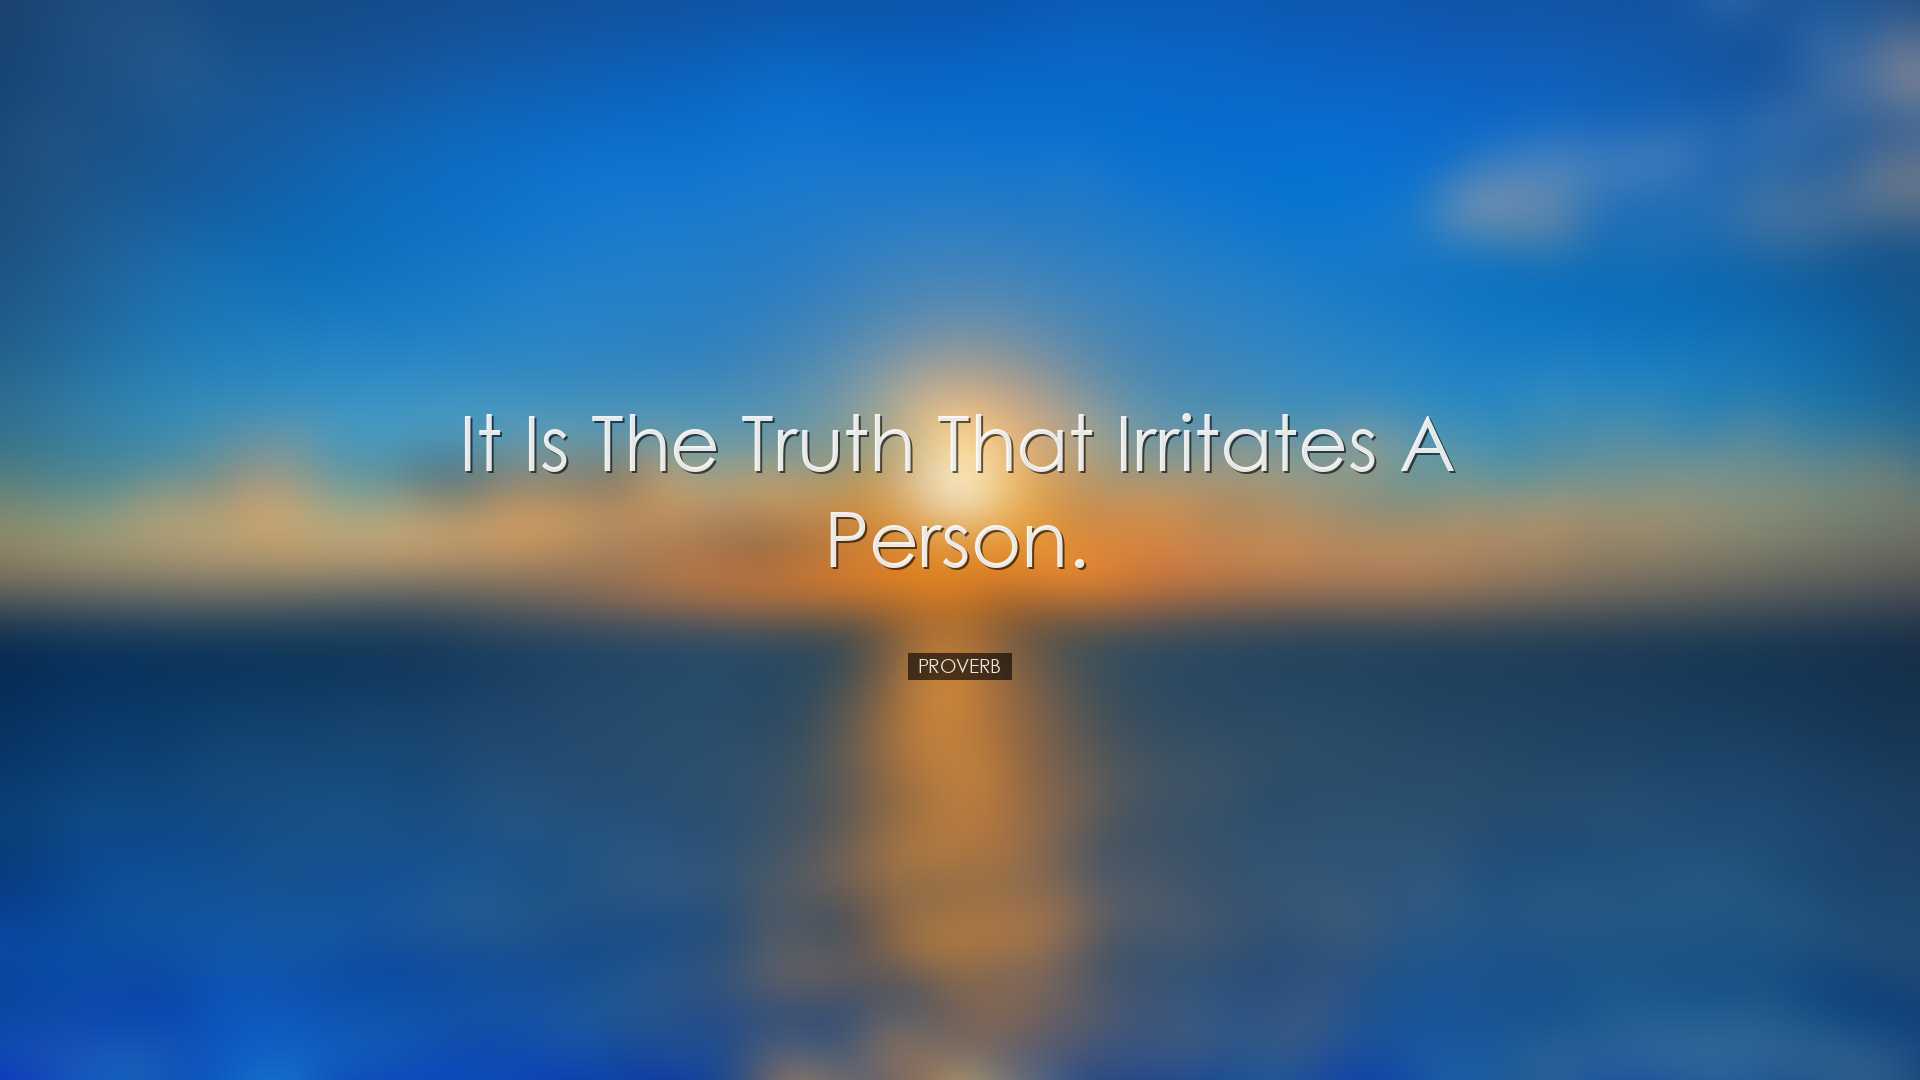 It is the truth that irritates a person. - Proverb